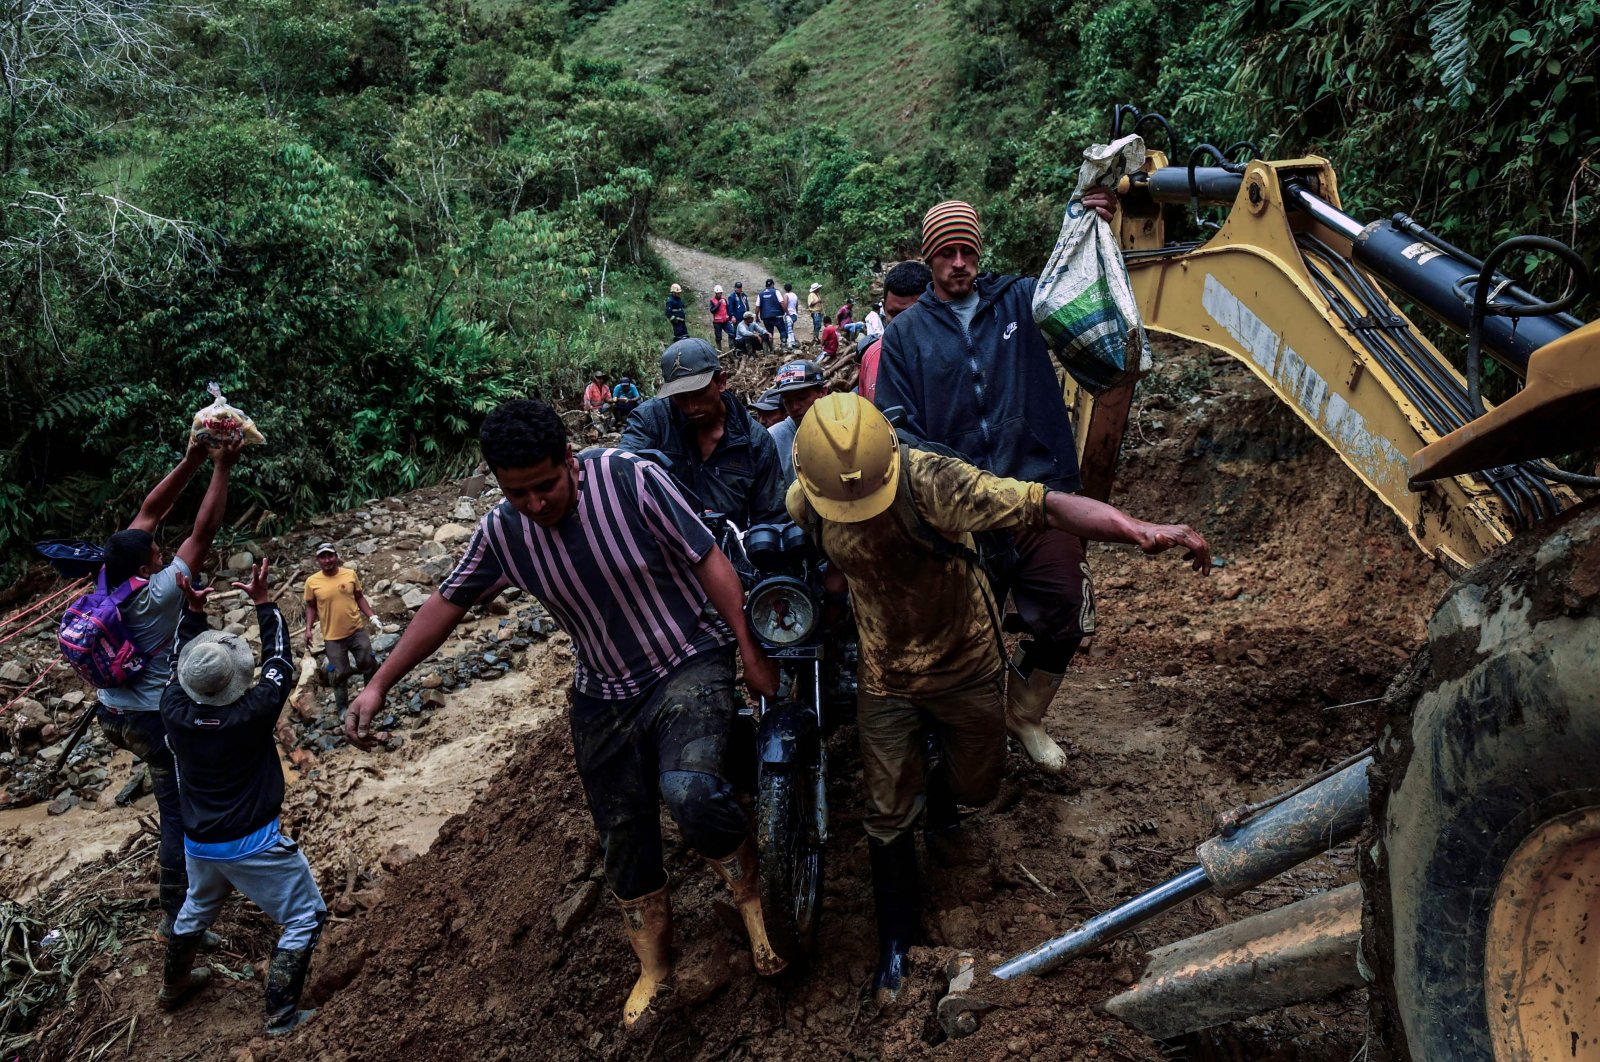 Miners exit the area near a gold mine affected by a landslide in Abriaqui, Antioquia department, Colombia, April 7, 2022. (AFP Photo)